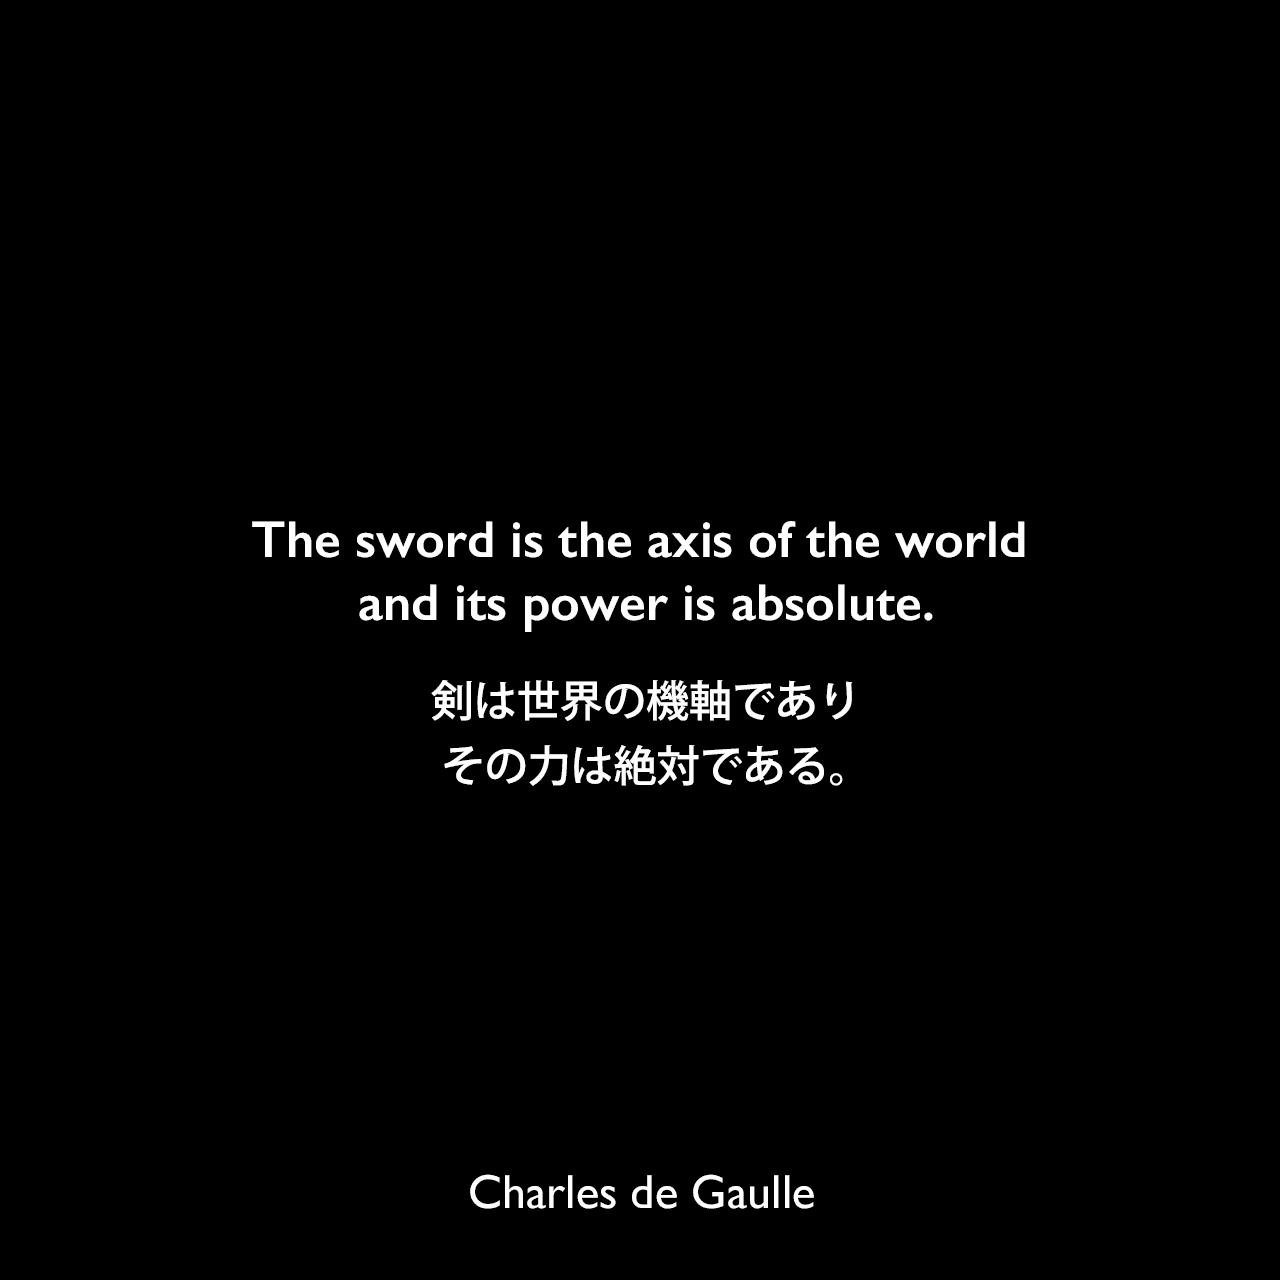 The sword is the axis of the world and its power is absolute.剣は世界の機軸であり、その力は絶対である。Charles de Gaulle